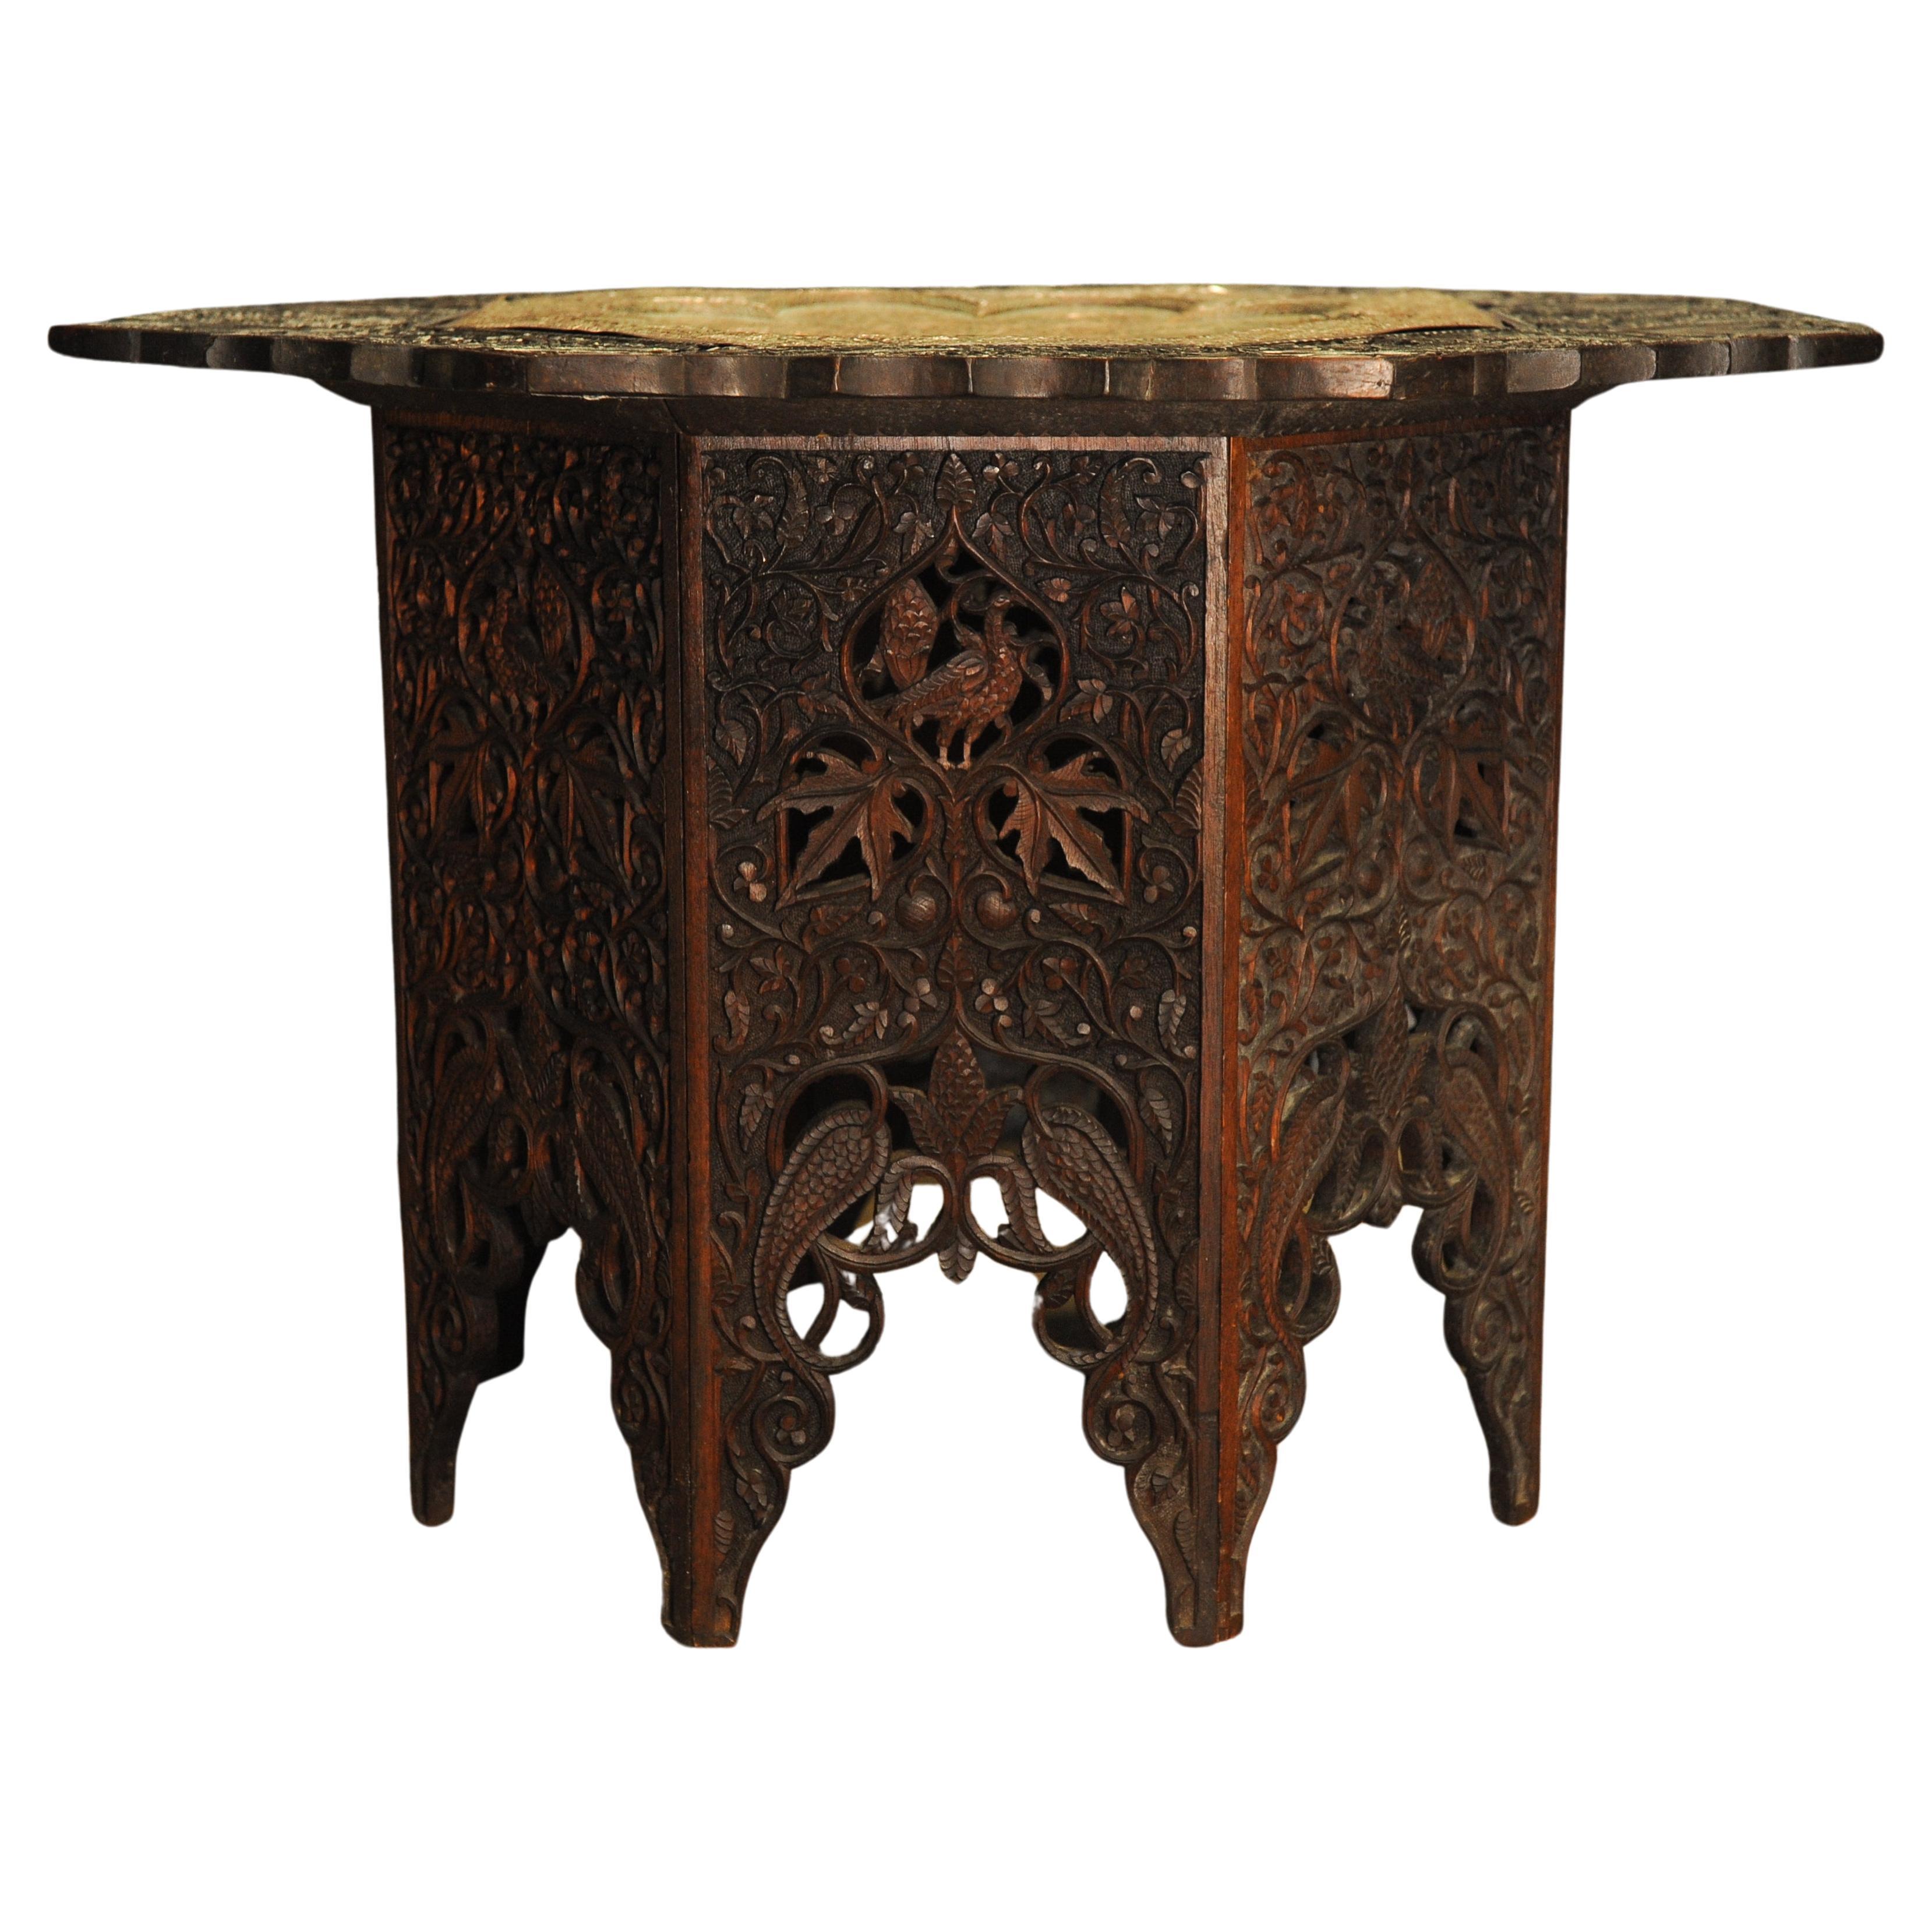 Ornately Carved Asian Hardwood and Hammered Brass Table In Good Condition For Sale In High Wycombe, GB